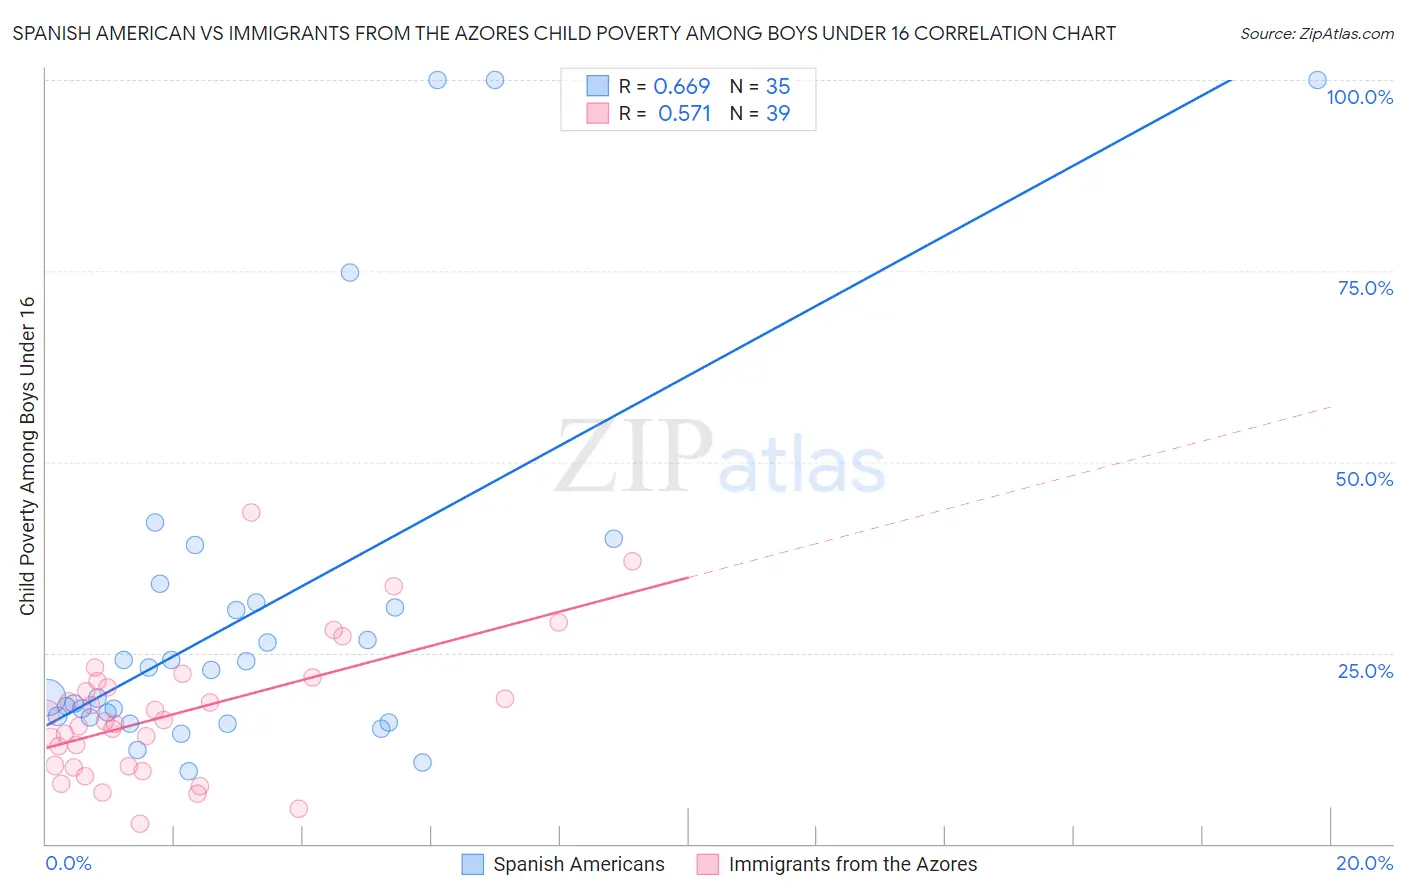 Spanish American vs Immigrants from the Azores Child Poverty Among Boys Under 16